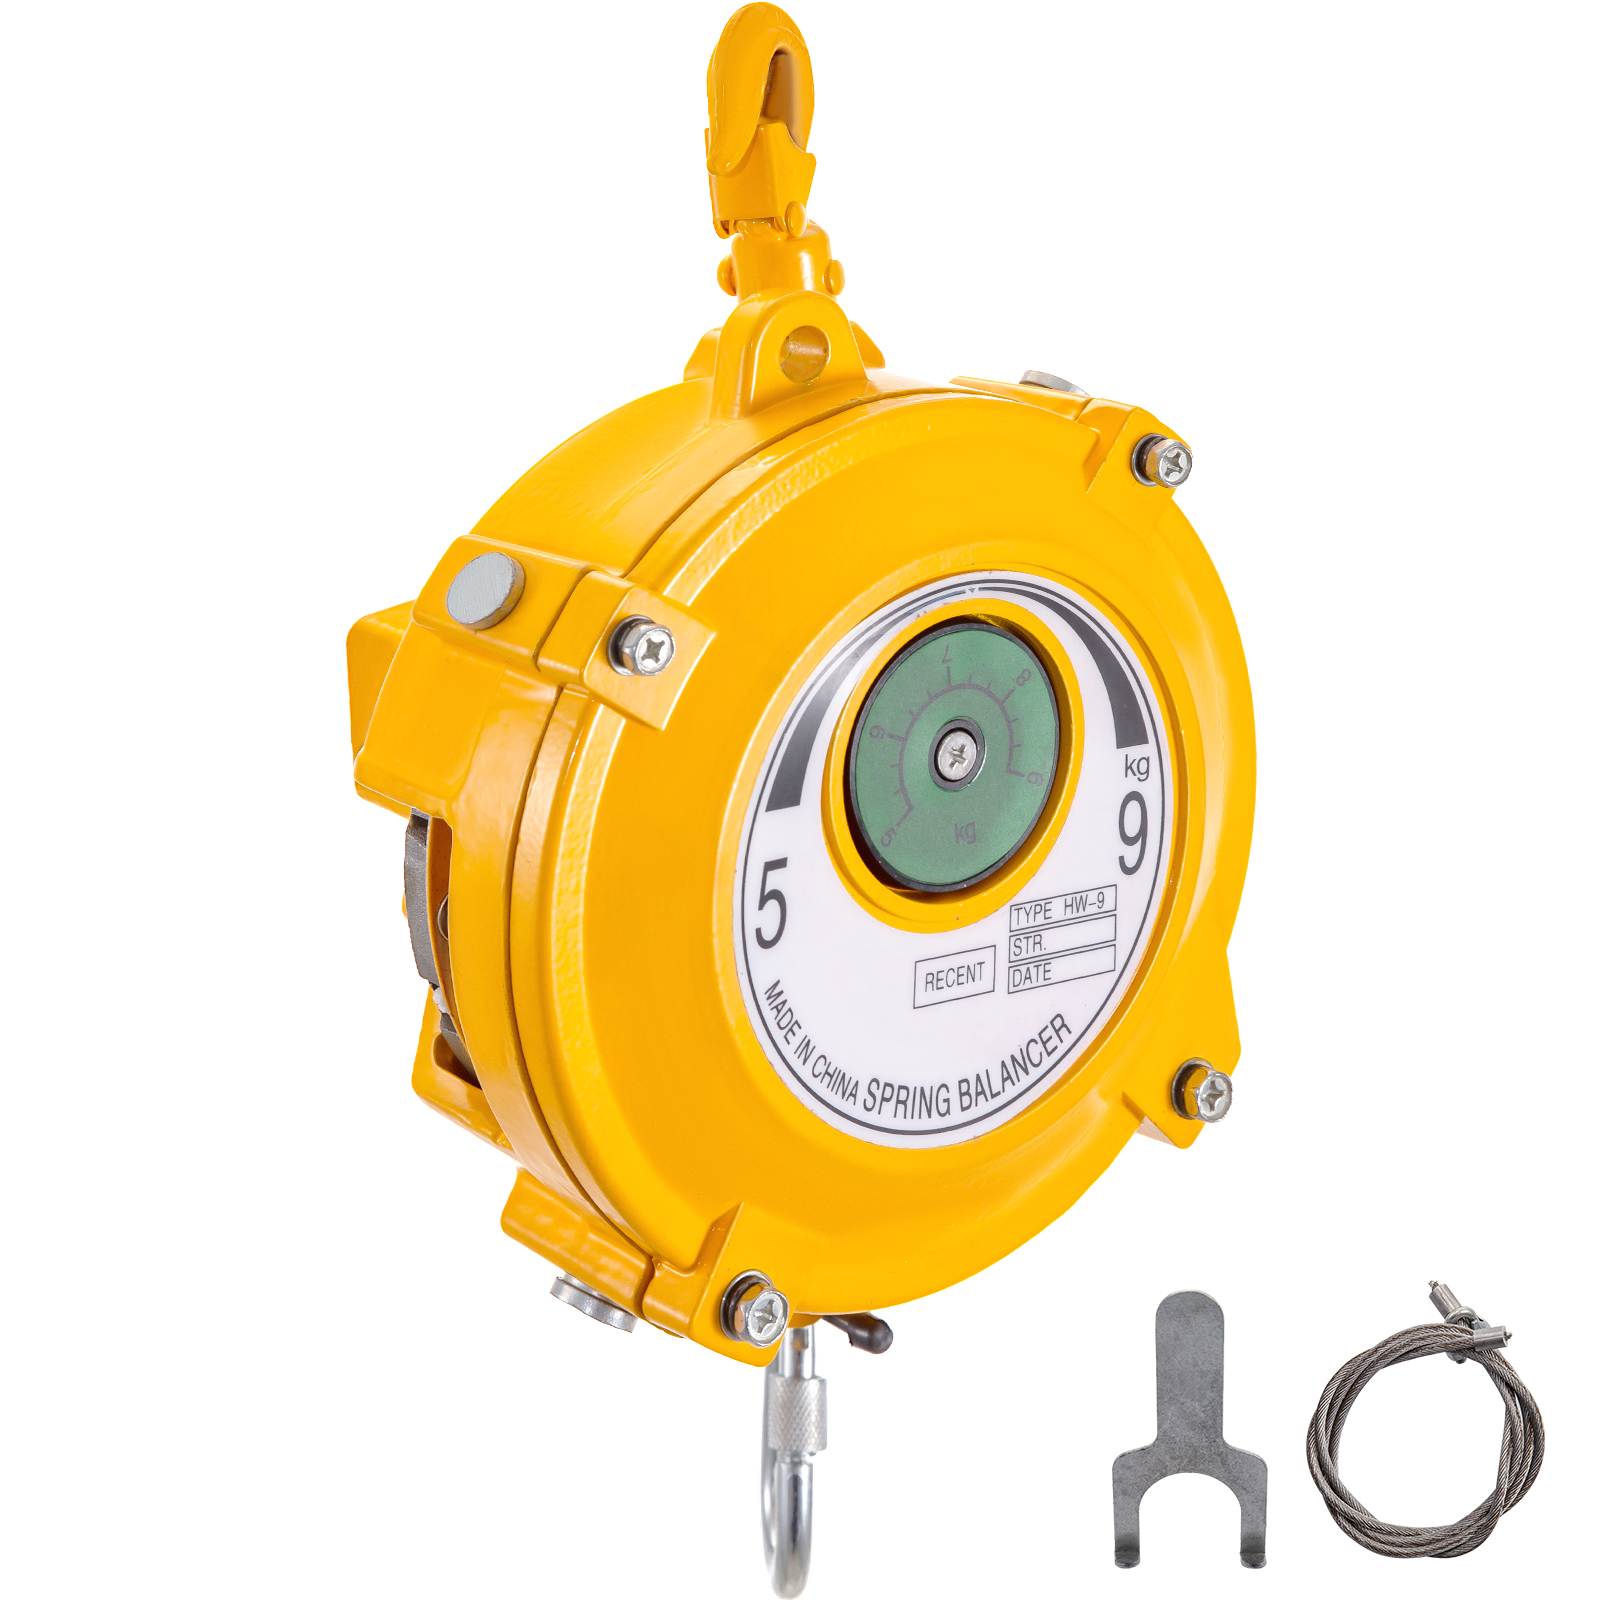 Spring Balancer Retractable Tool Holder 11-19lbs(5-9kg) Hanging Equipment Yellow от Vevor Many GEOs